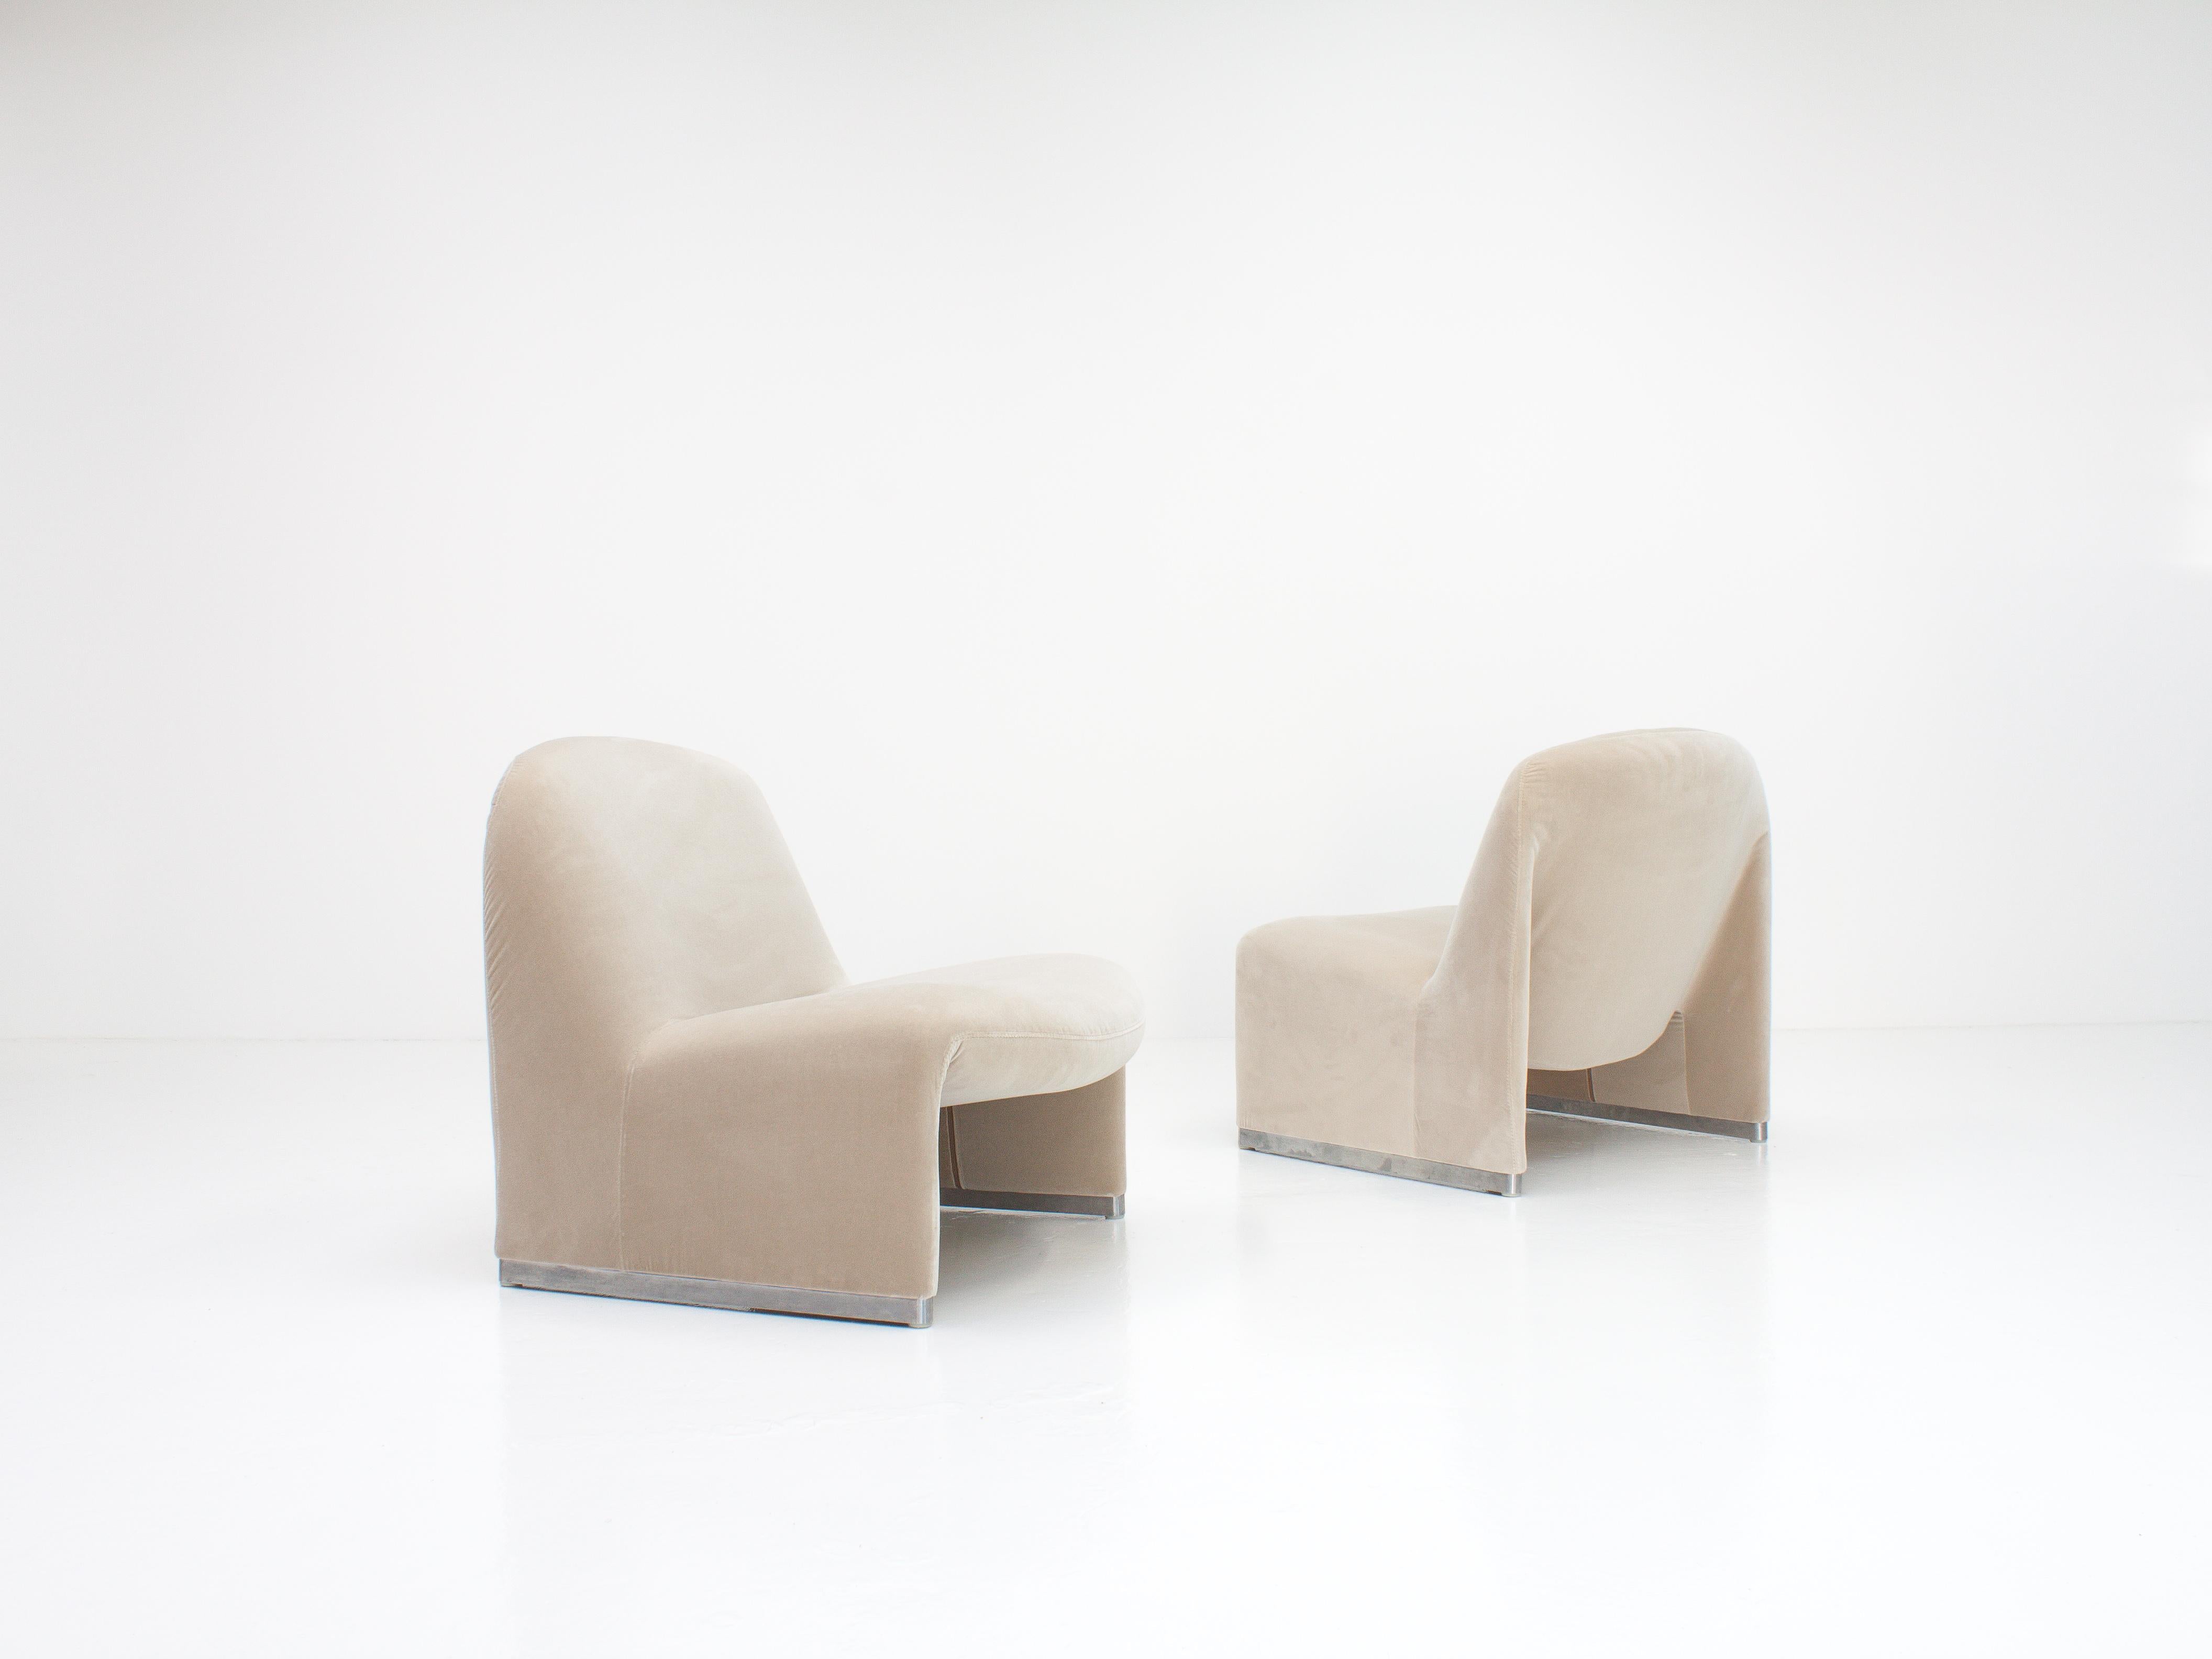 A pair of Giancarlo Piretti “Alky” chairs newly upholstered in designers guild linen colored velvet. Manufactured by Castelli in the 1970s.

The organic shape offers a minimal appearance but also comfort.

  

   

   




 